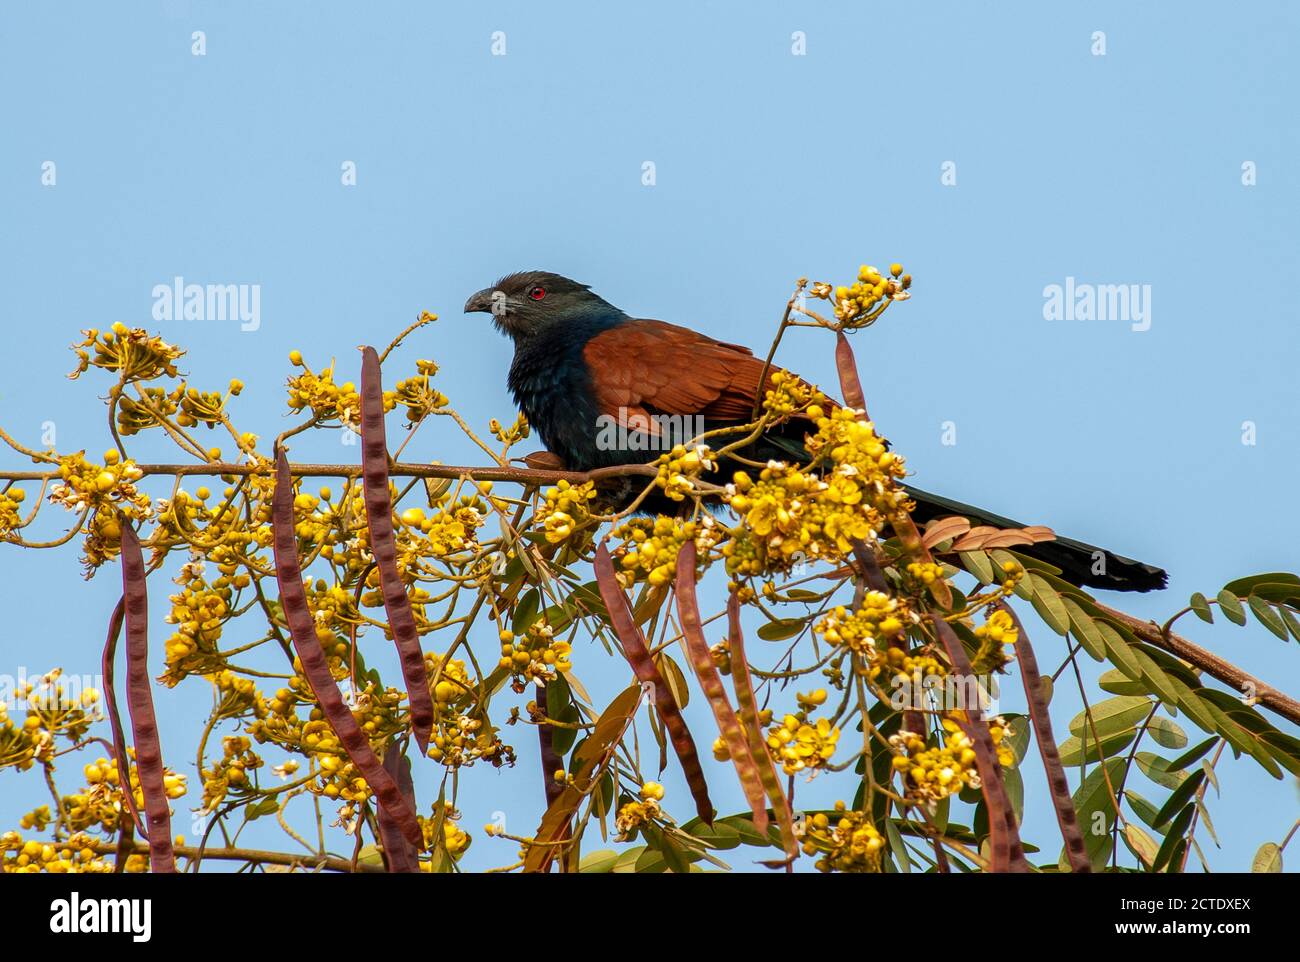 Greater Coucal (Centropus sinensis parroti, Centropus parroti), sitting on the top of a tree with small yellow flowers, India Stock Photo